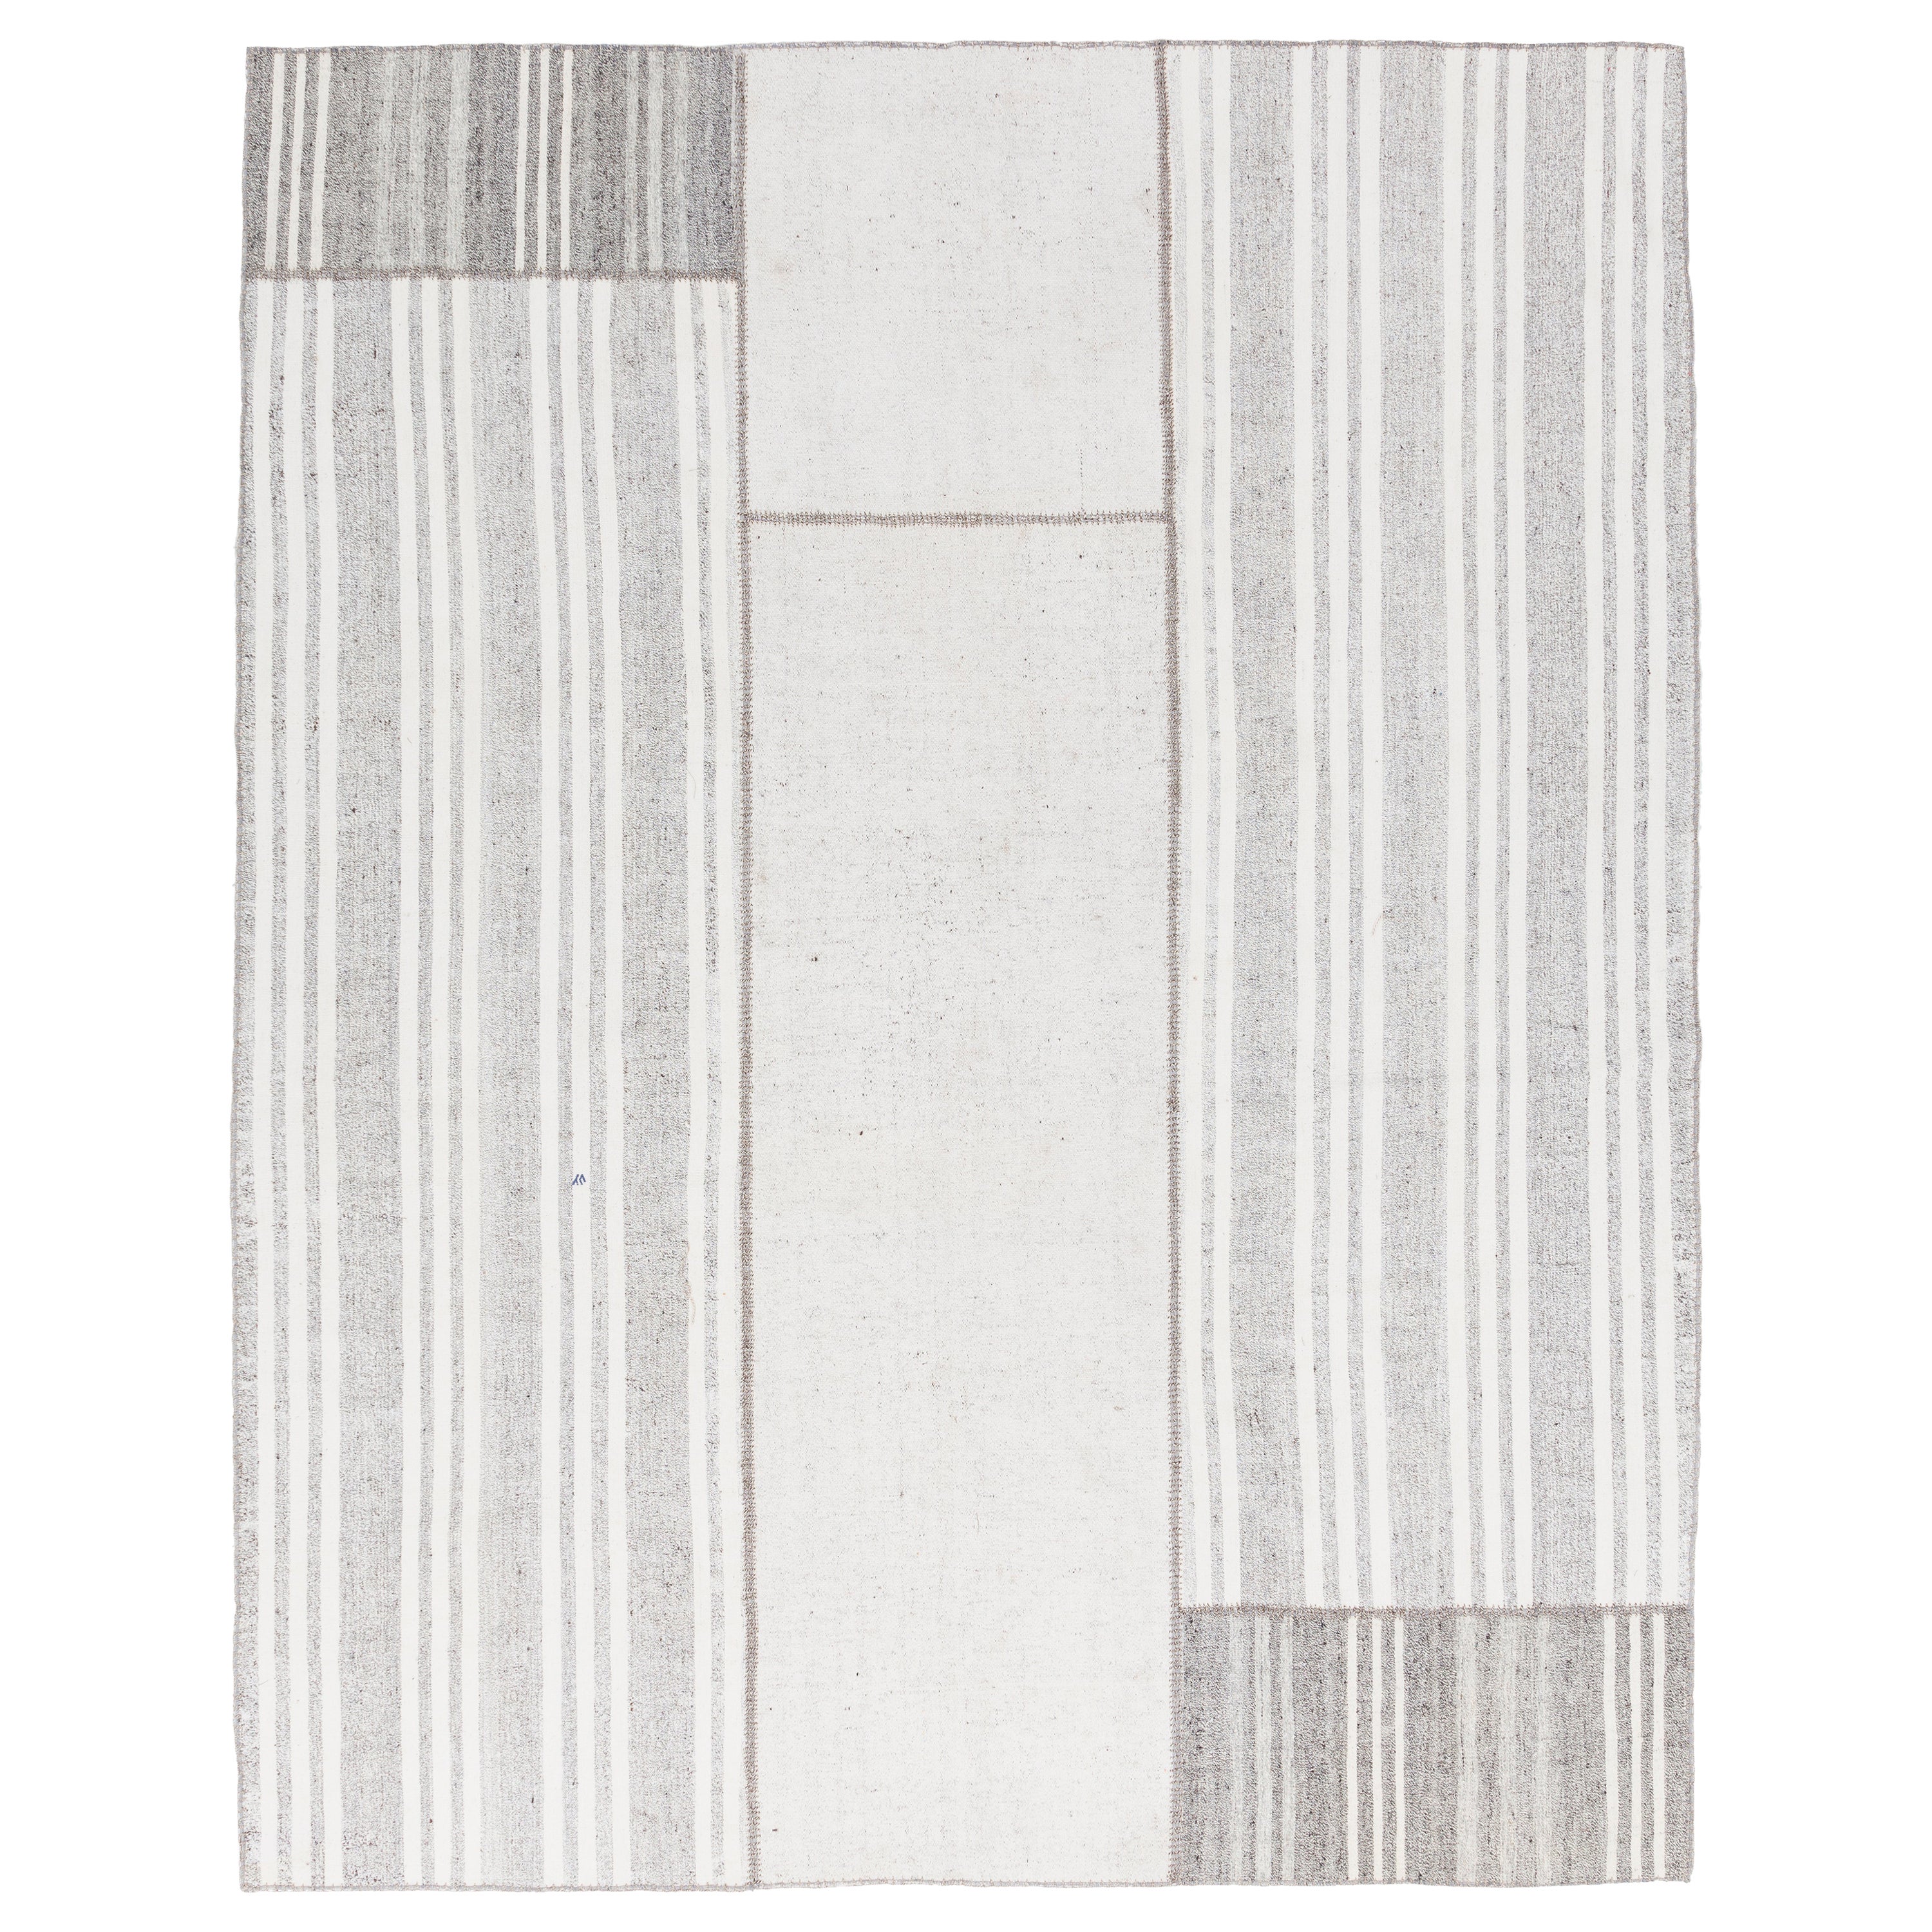 8.4x10.3 Ft Hand-Woven Vintage Cotton Anatolian Kilim in Gray with White Stripes For Sale